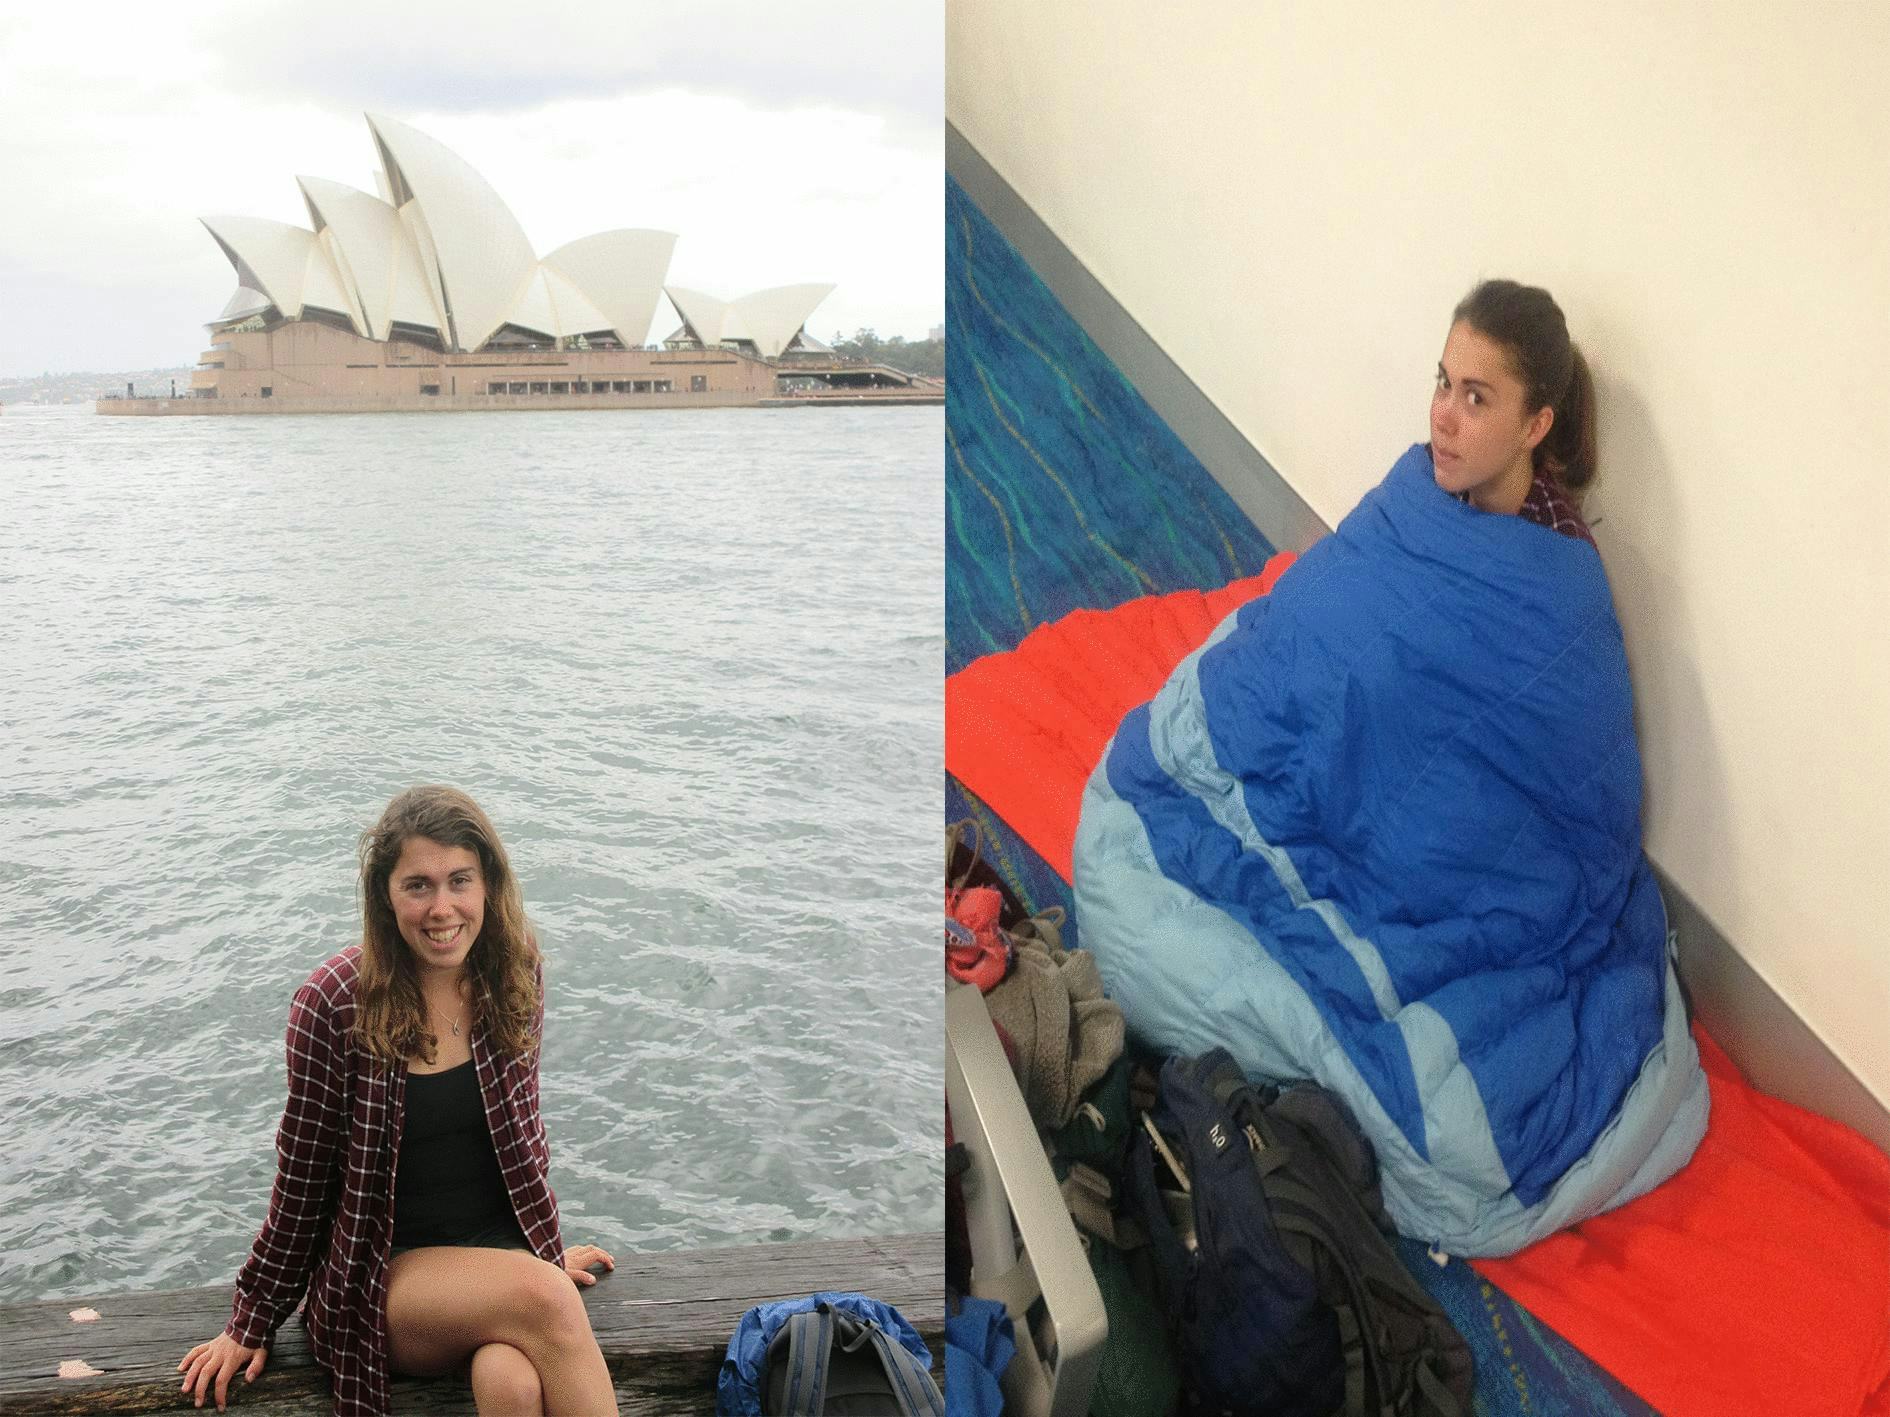 On the left, a woman sits in front of the Sydney opera house and waterfront. On the right, the same woman sits on the floor wrapped up in a blue banket. 